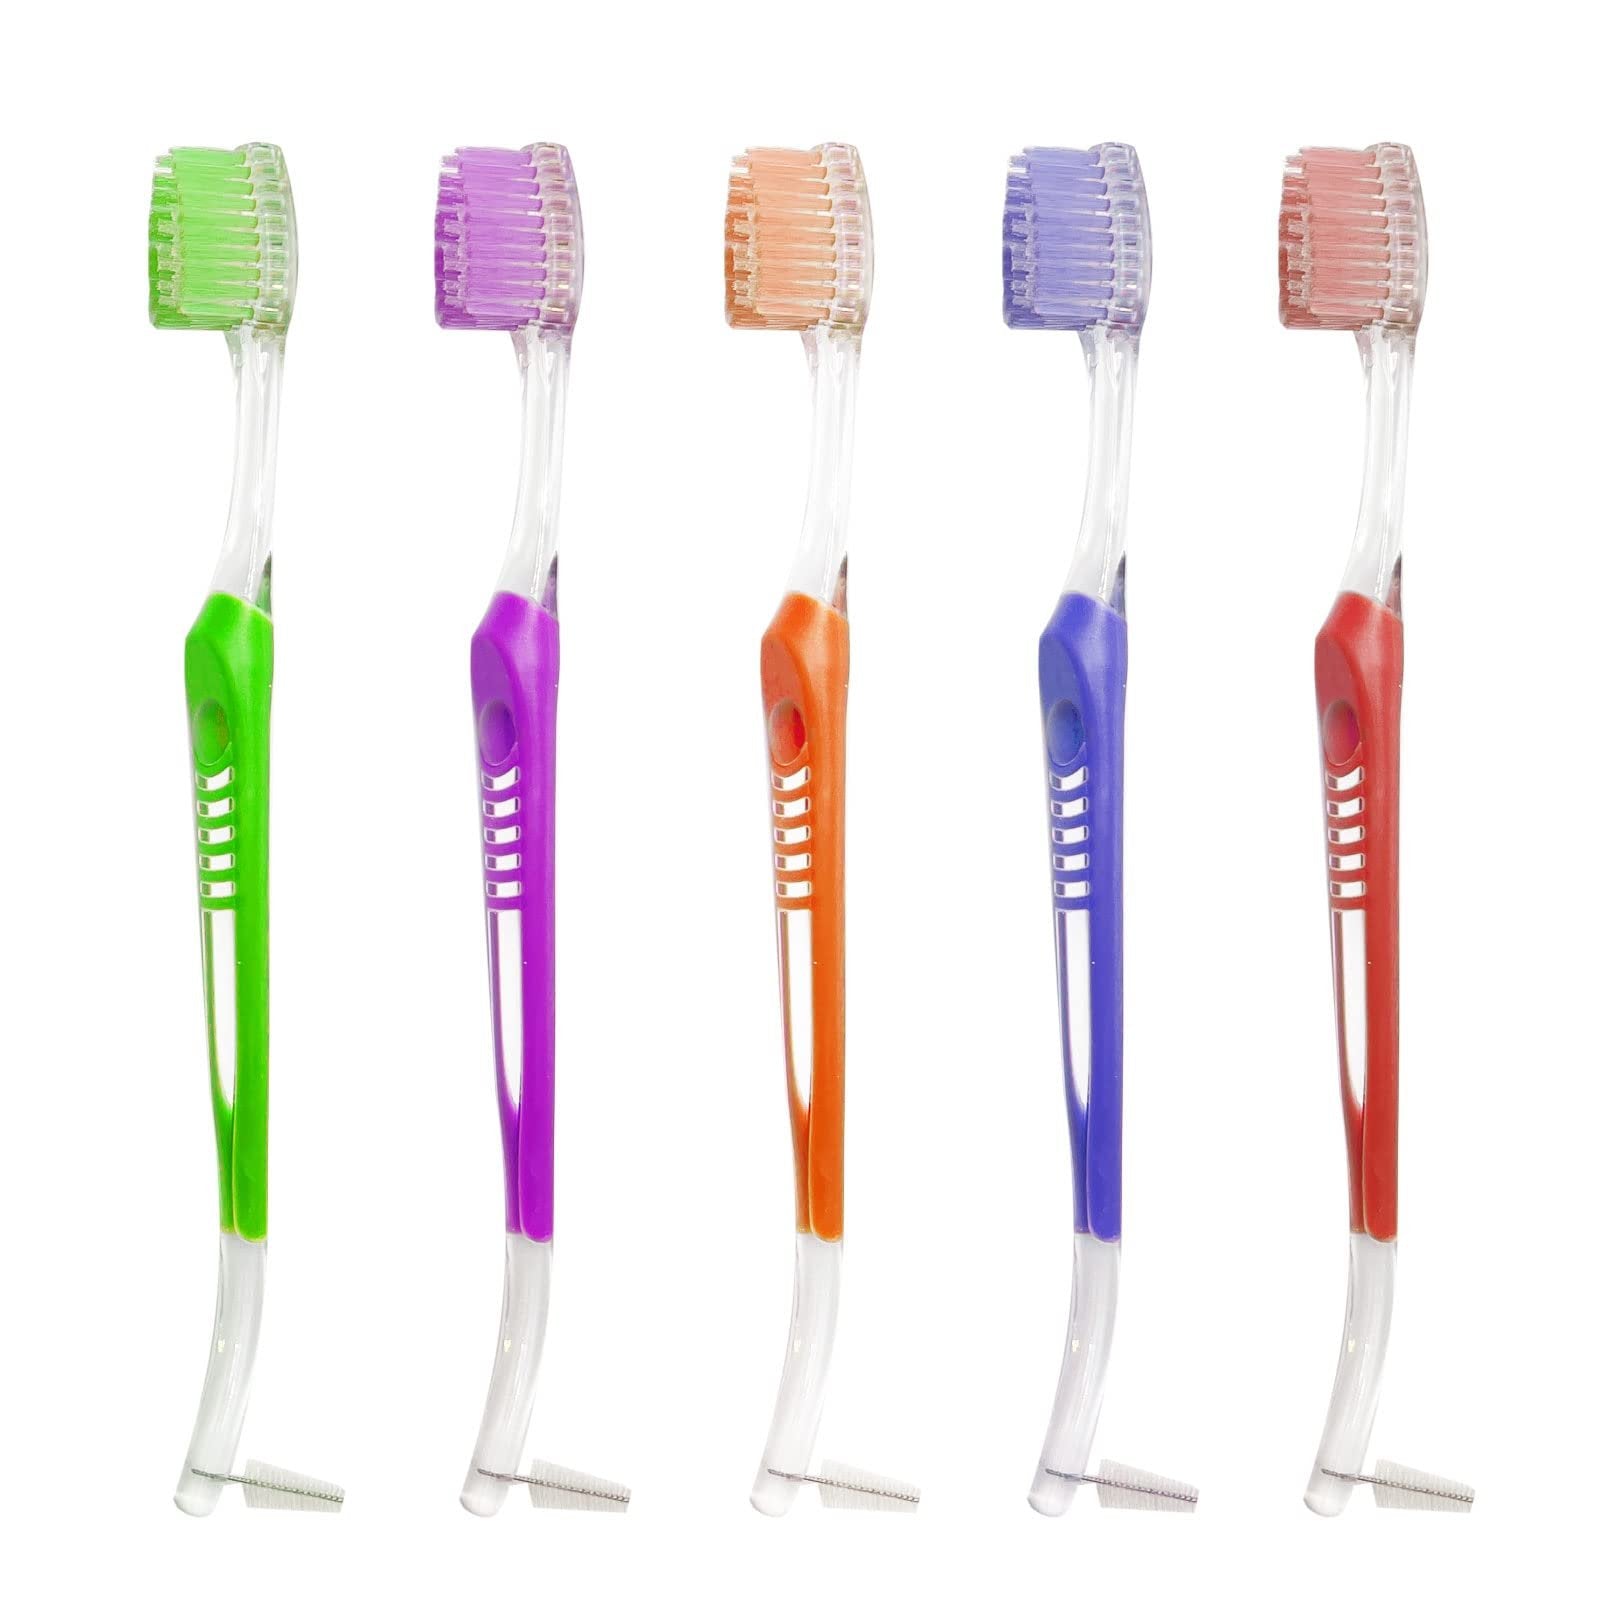 Orthodontic Toothbrush Double Ended Ortho Toothbrush V-Trim Brush and Interspace Brush for Ortho Brace Teeth Cleaning, 5 Pcs